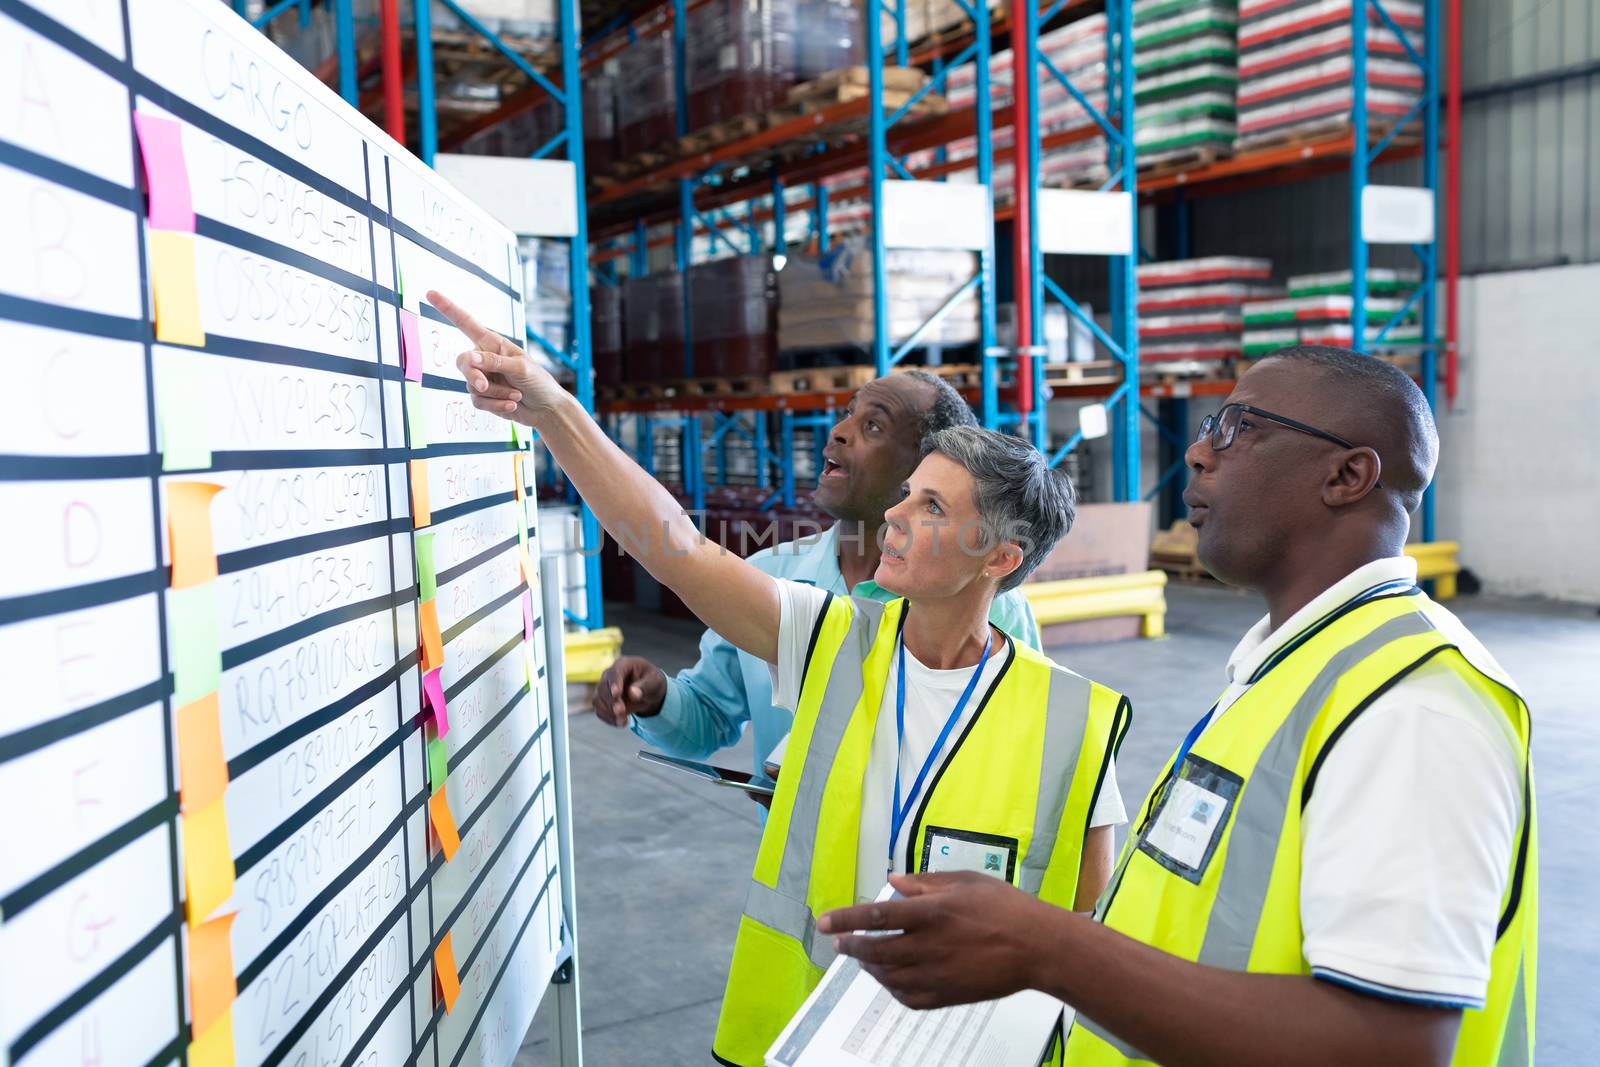 Side view of mature diverse warehouse staffs discussing over whiteboard in warehouse. This is a freight transportation and distribution warehouse. Industrial and industrial workers concept